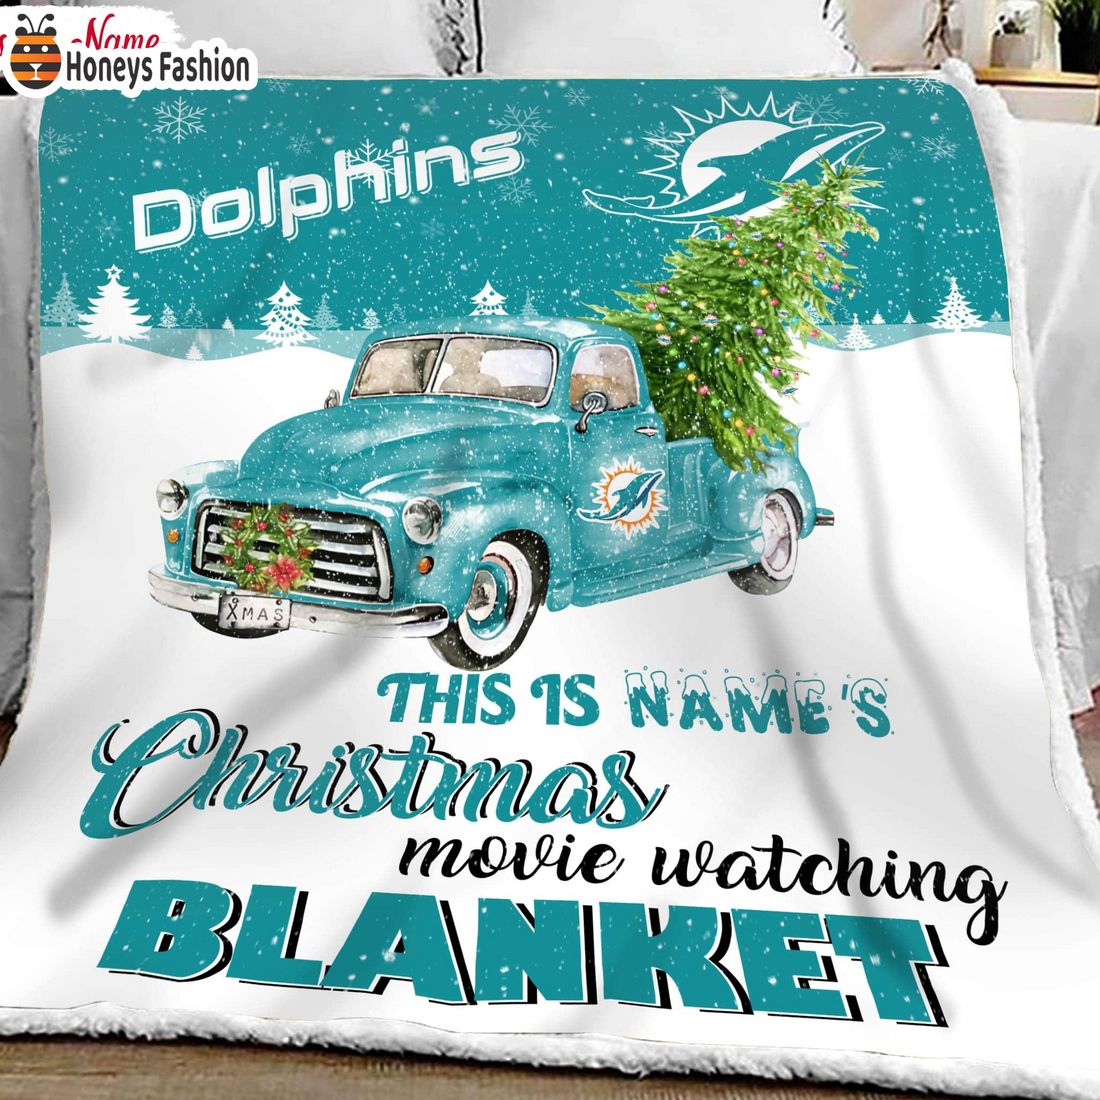 NFL Miami Dolphins Custom Name Christmas movie watching quilt blanket